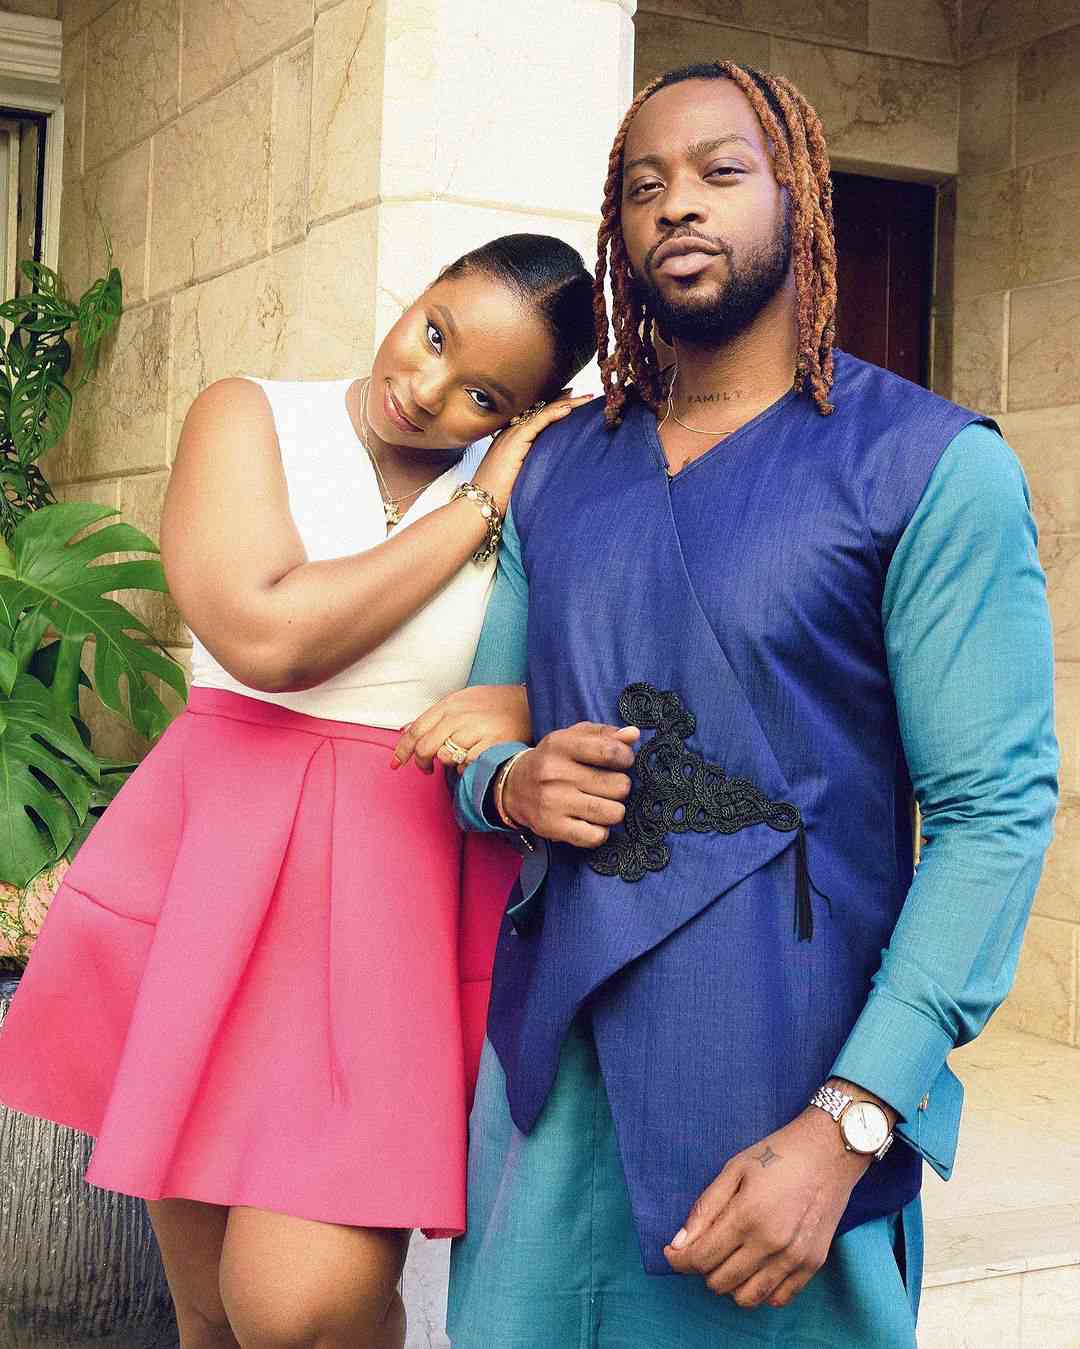 "I don't care about trolls, my husband's opinion matters the most to me" – BamBam